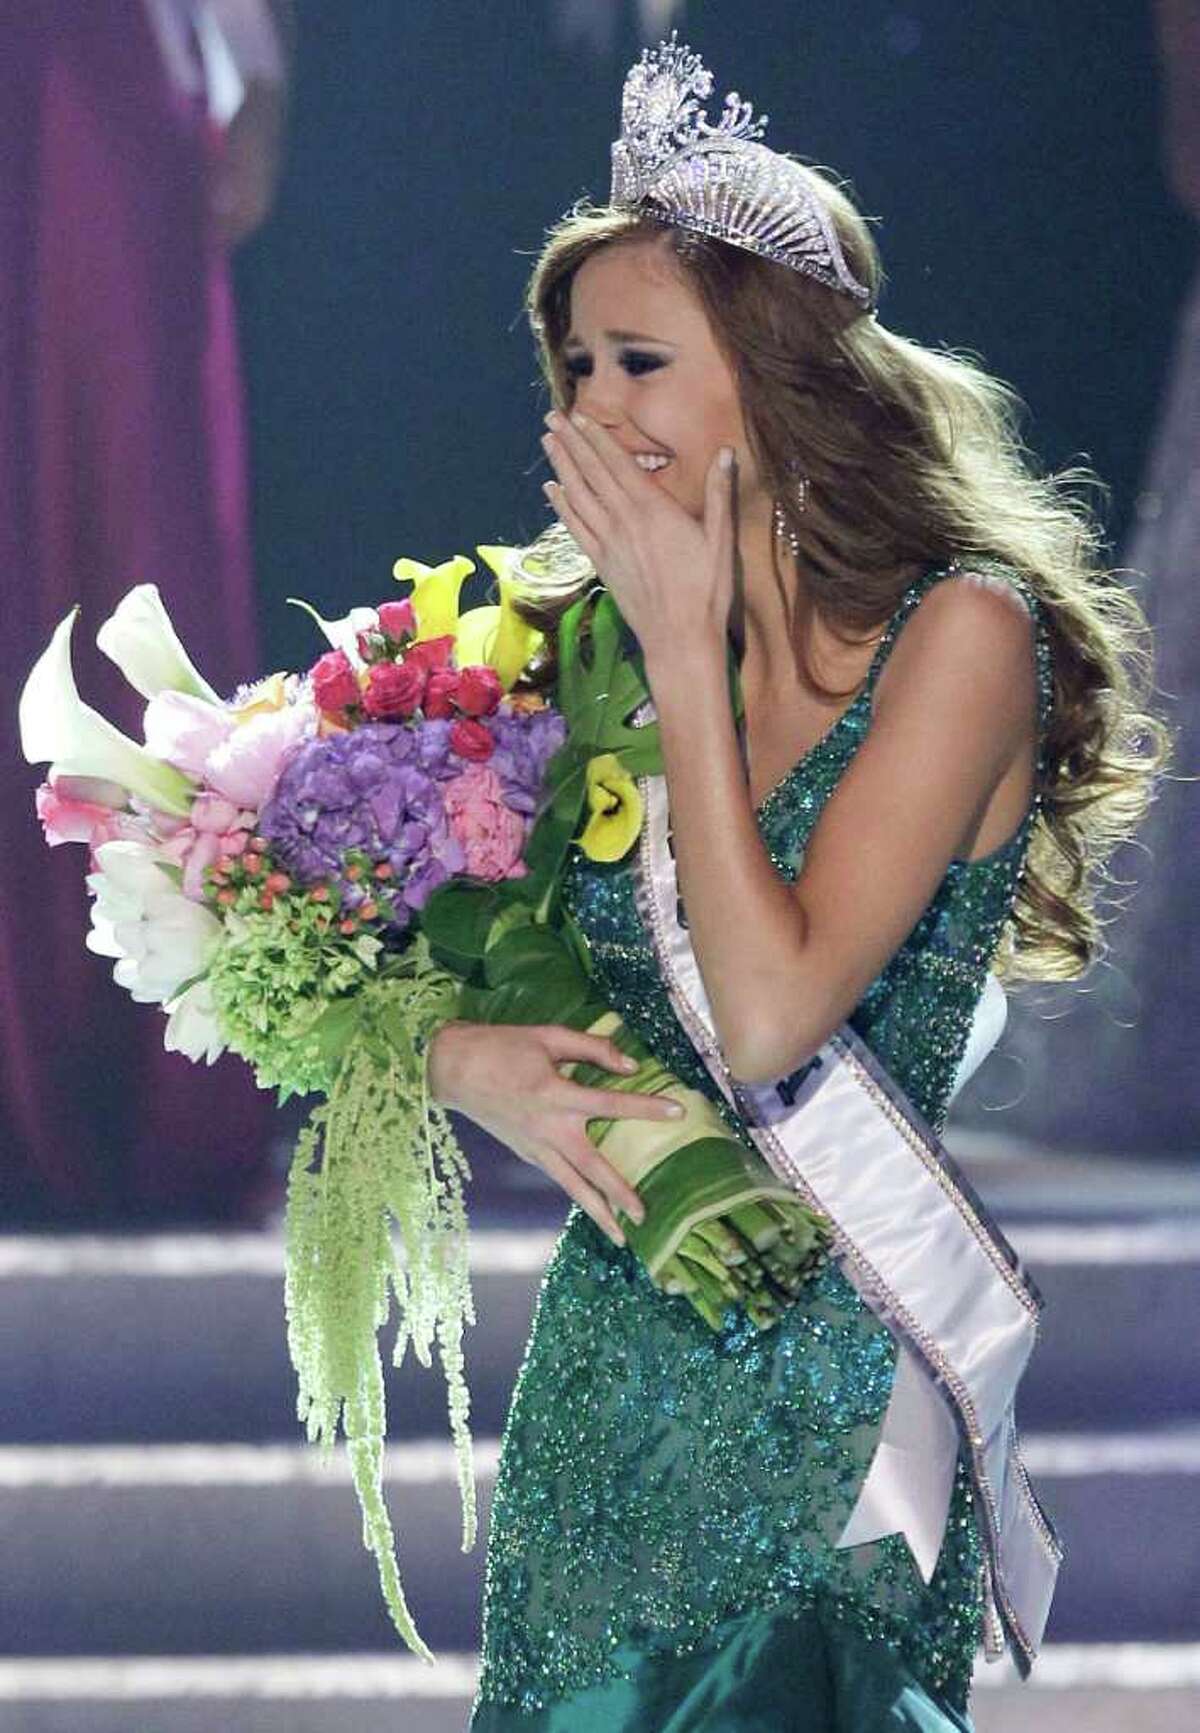 Alyssa Campanella, Miss California, reacts after being crowned the 2011 Miss USA, Sunday, June 19, 2011, in Las Vegas.